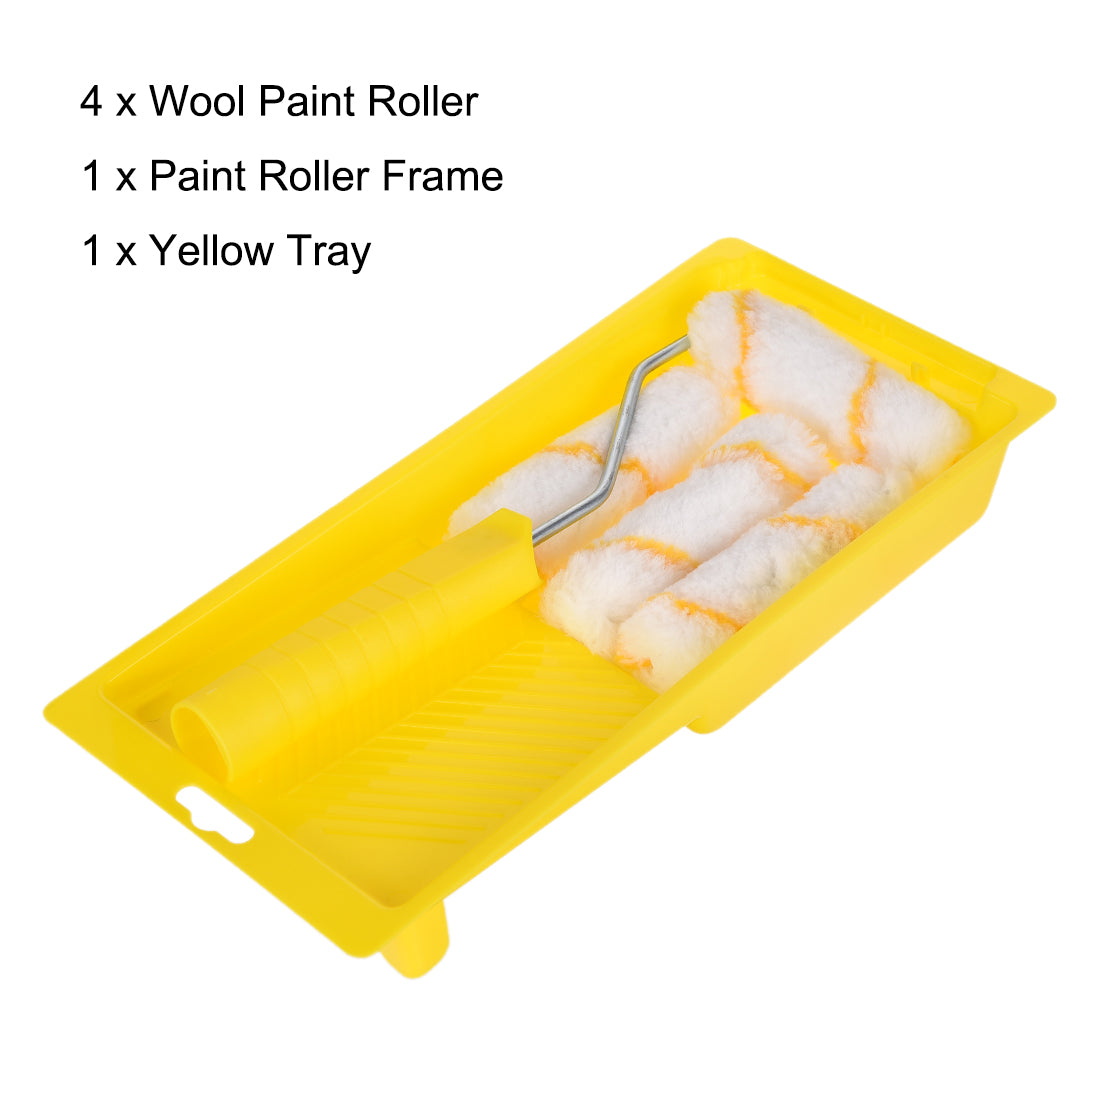 uxcell Uxcell Paint Roller Kit, 4 Inch 4xWool Paint Roller Covers, 1xPaint Roller Frame, 1xPaint Roller Tray, 7Pcs